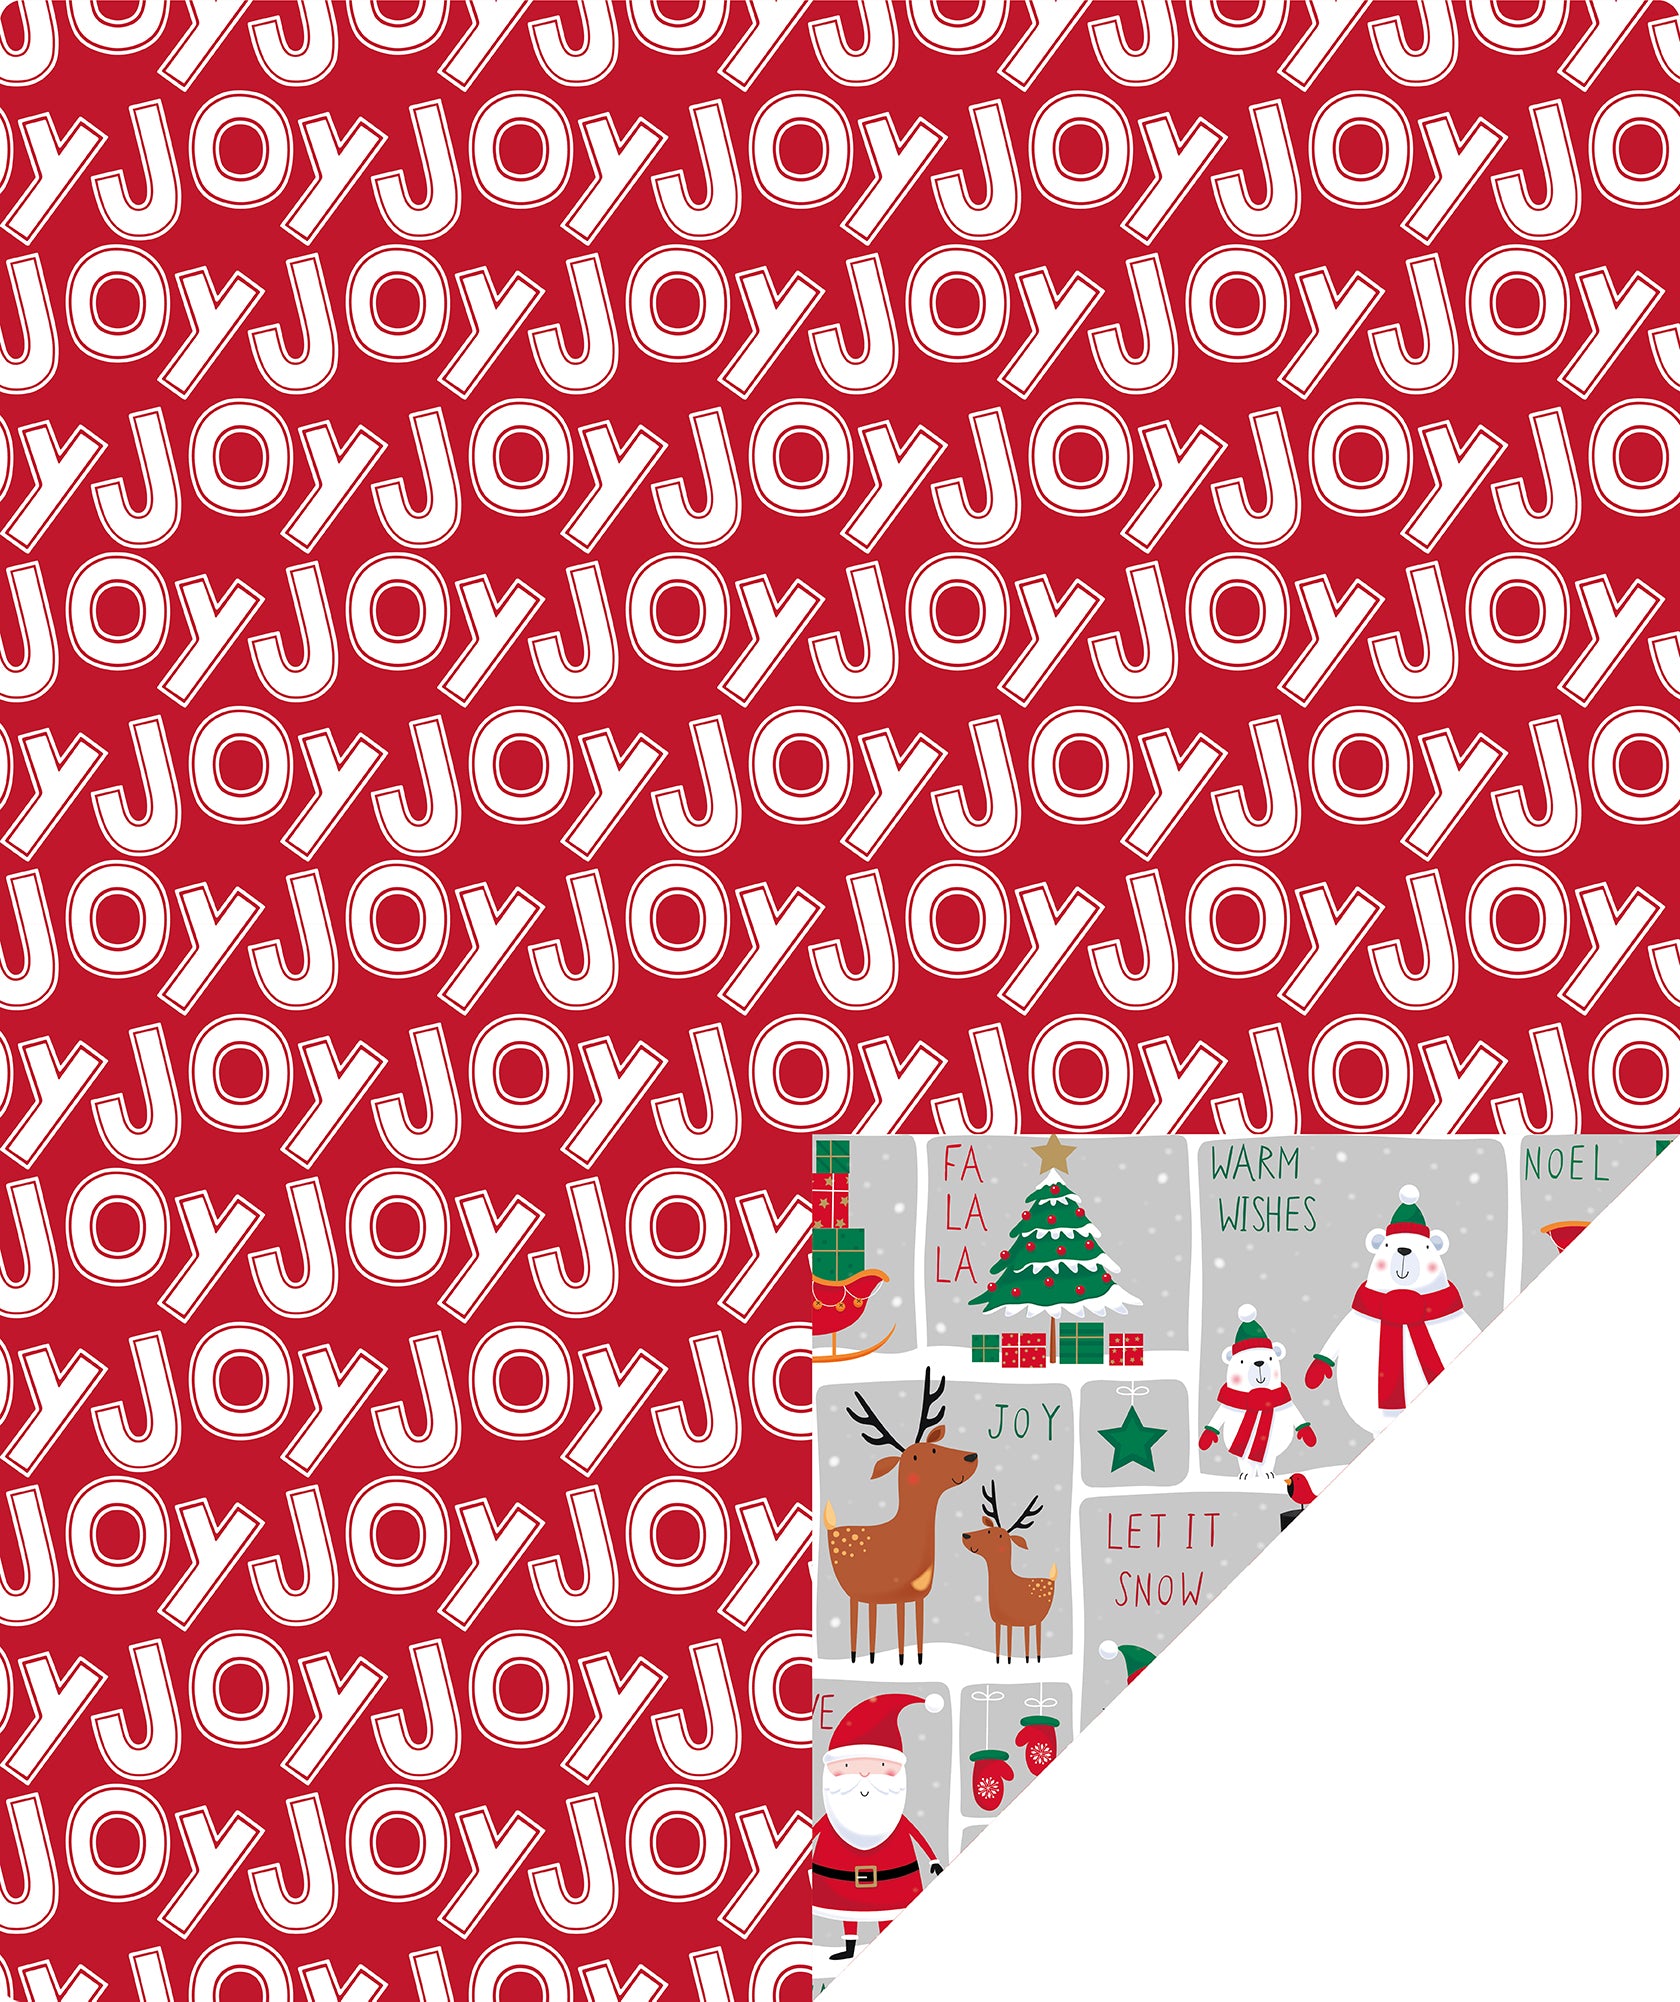 Winter Snowman Wrapping Paper Roll with White Joy Text on Red Background on Reverse Wholesale Wrapholic